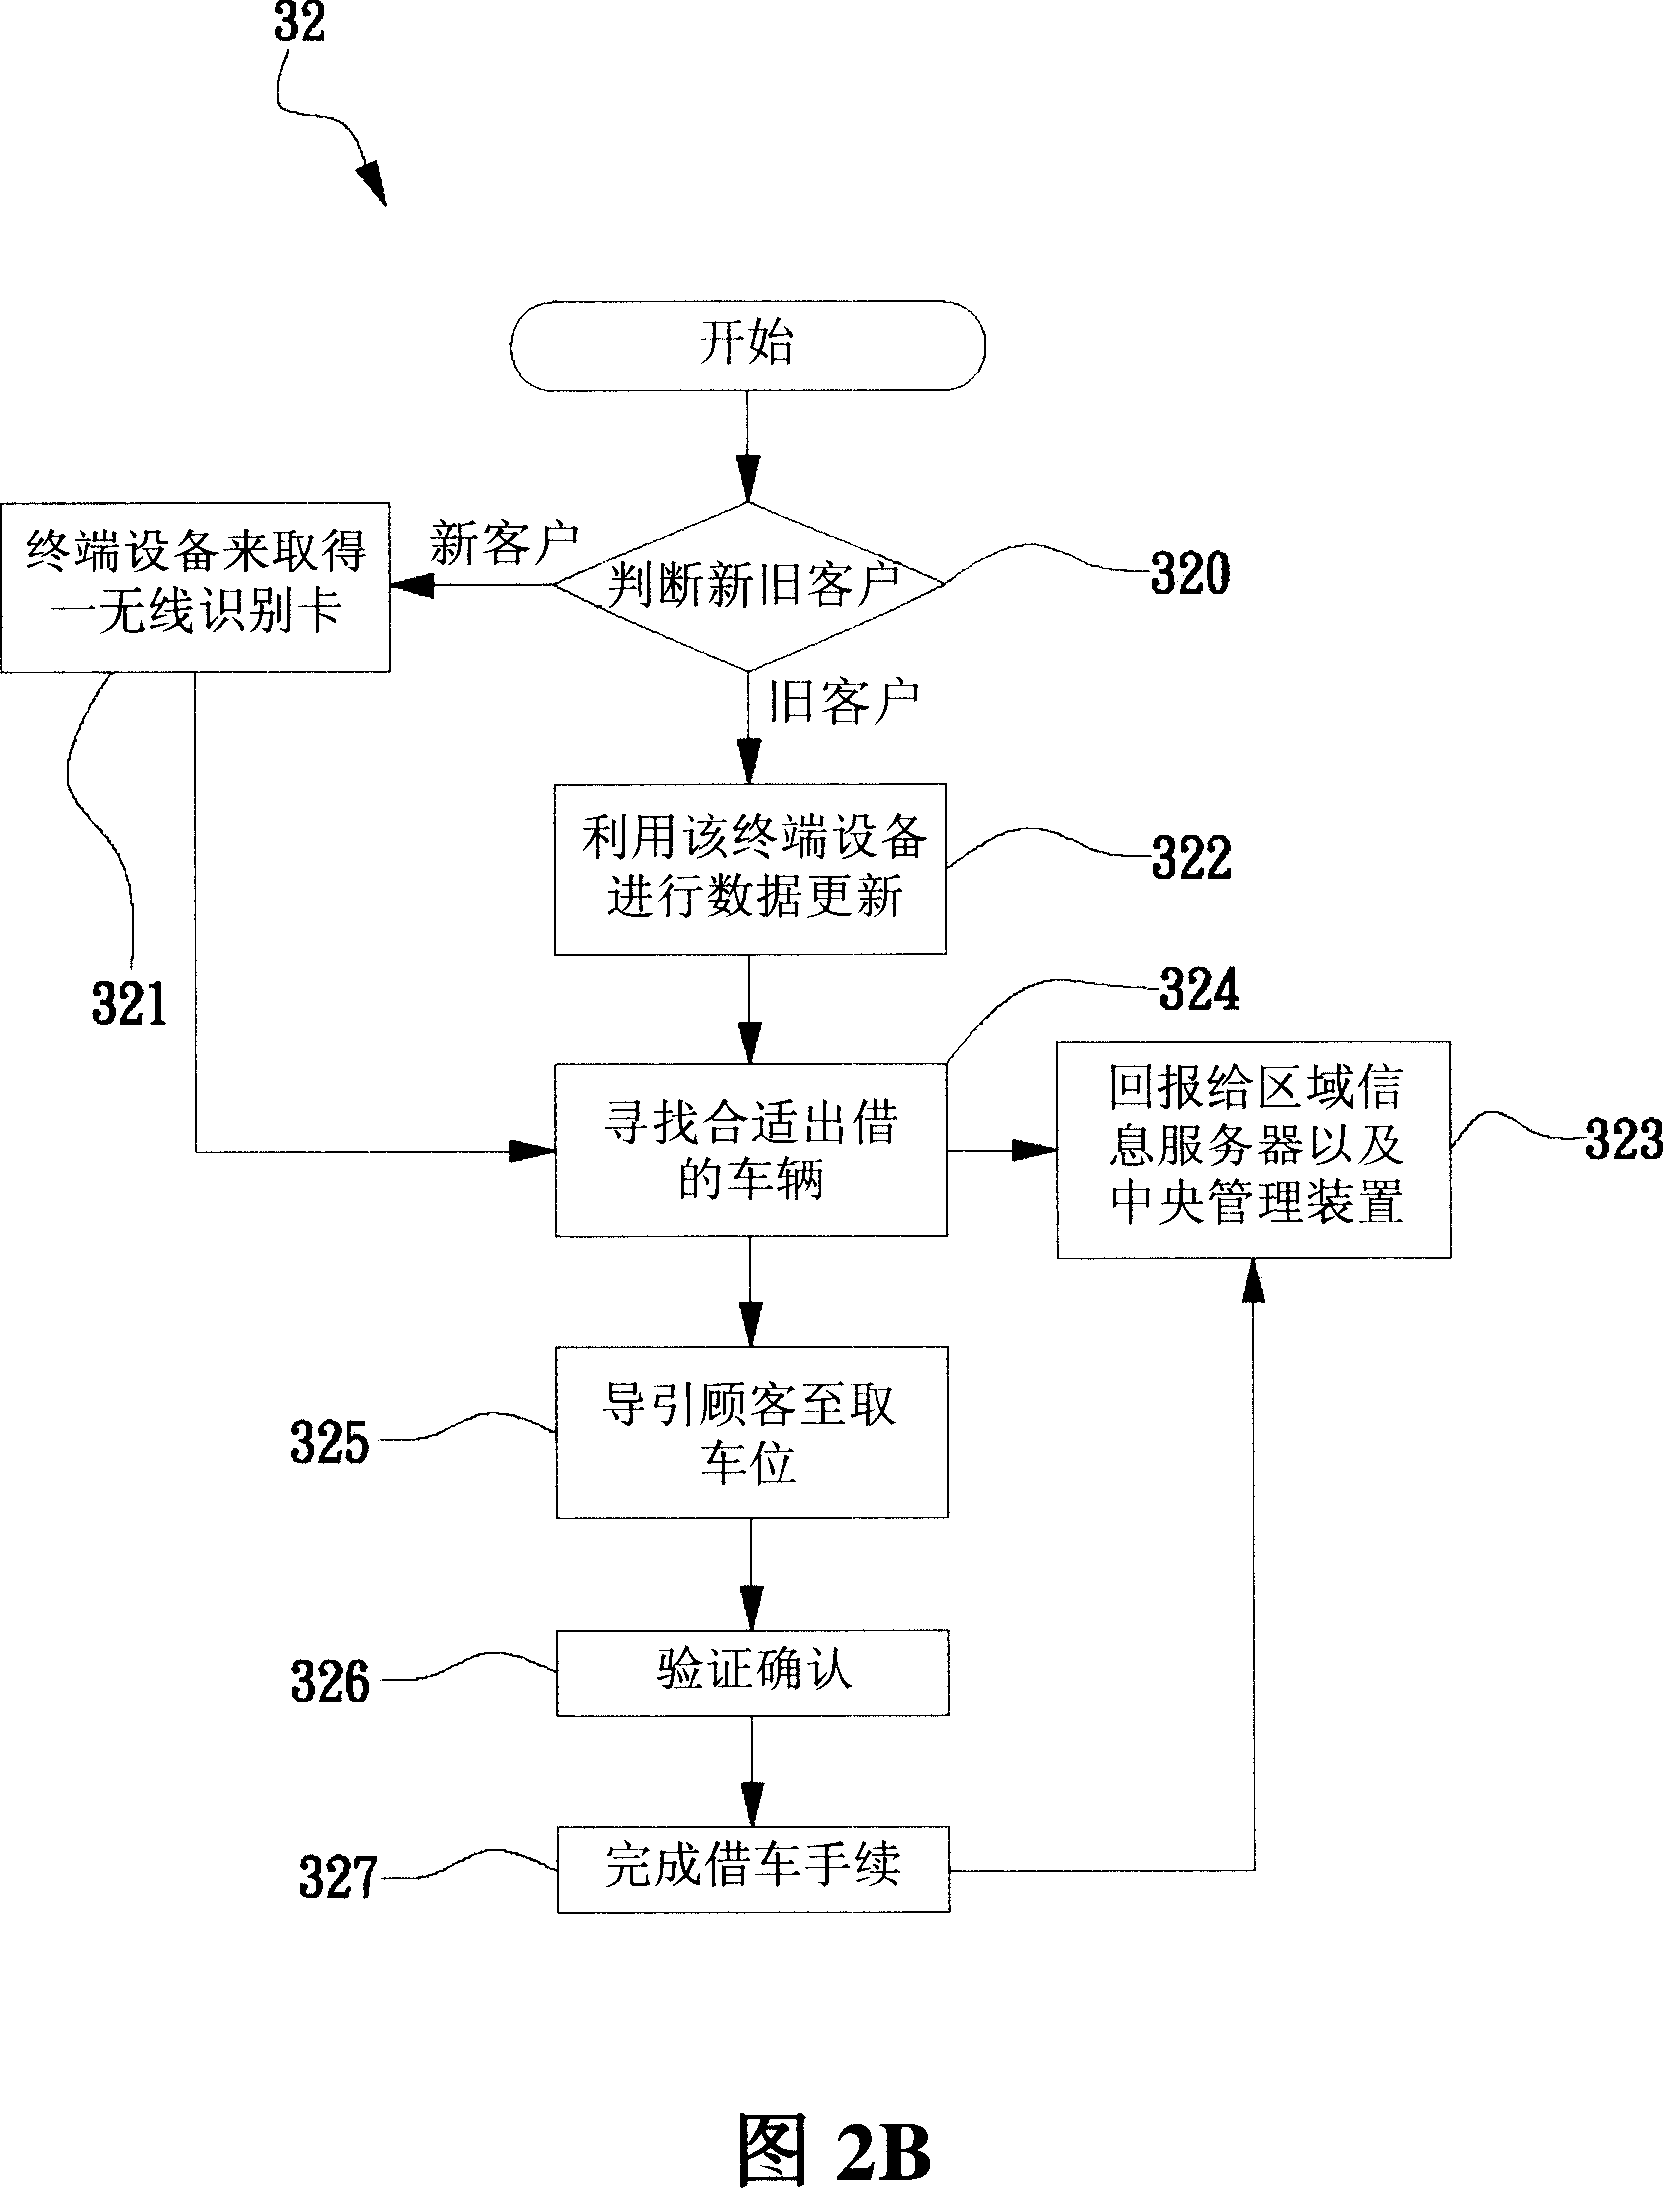 Regional electric motor management device and method